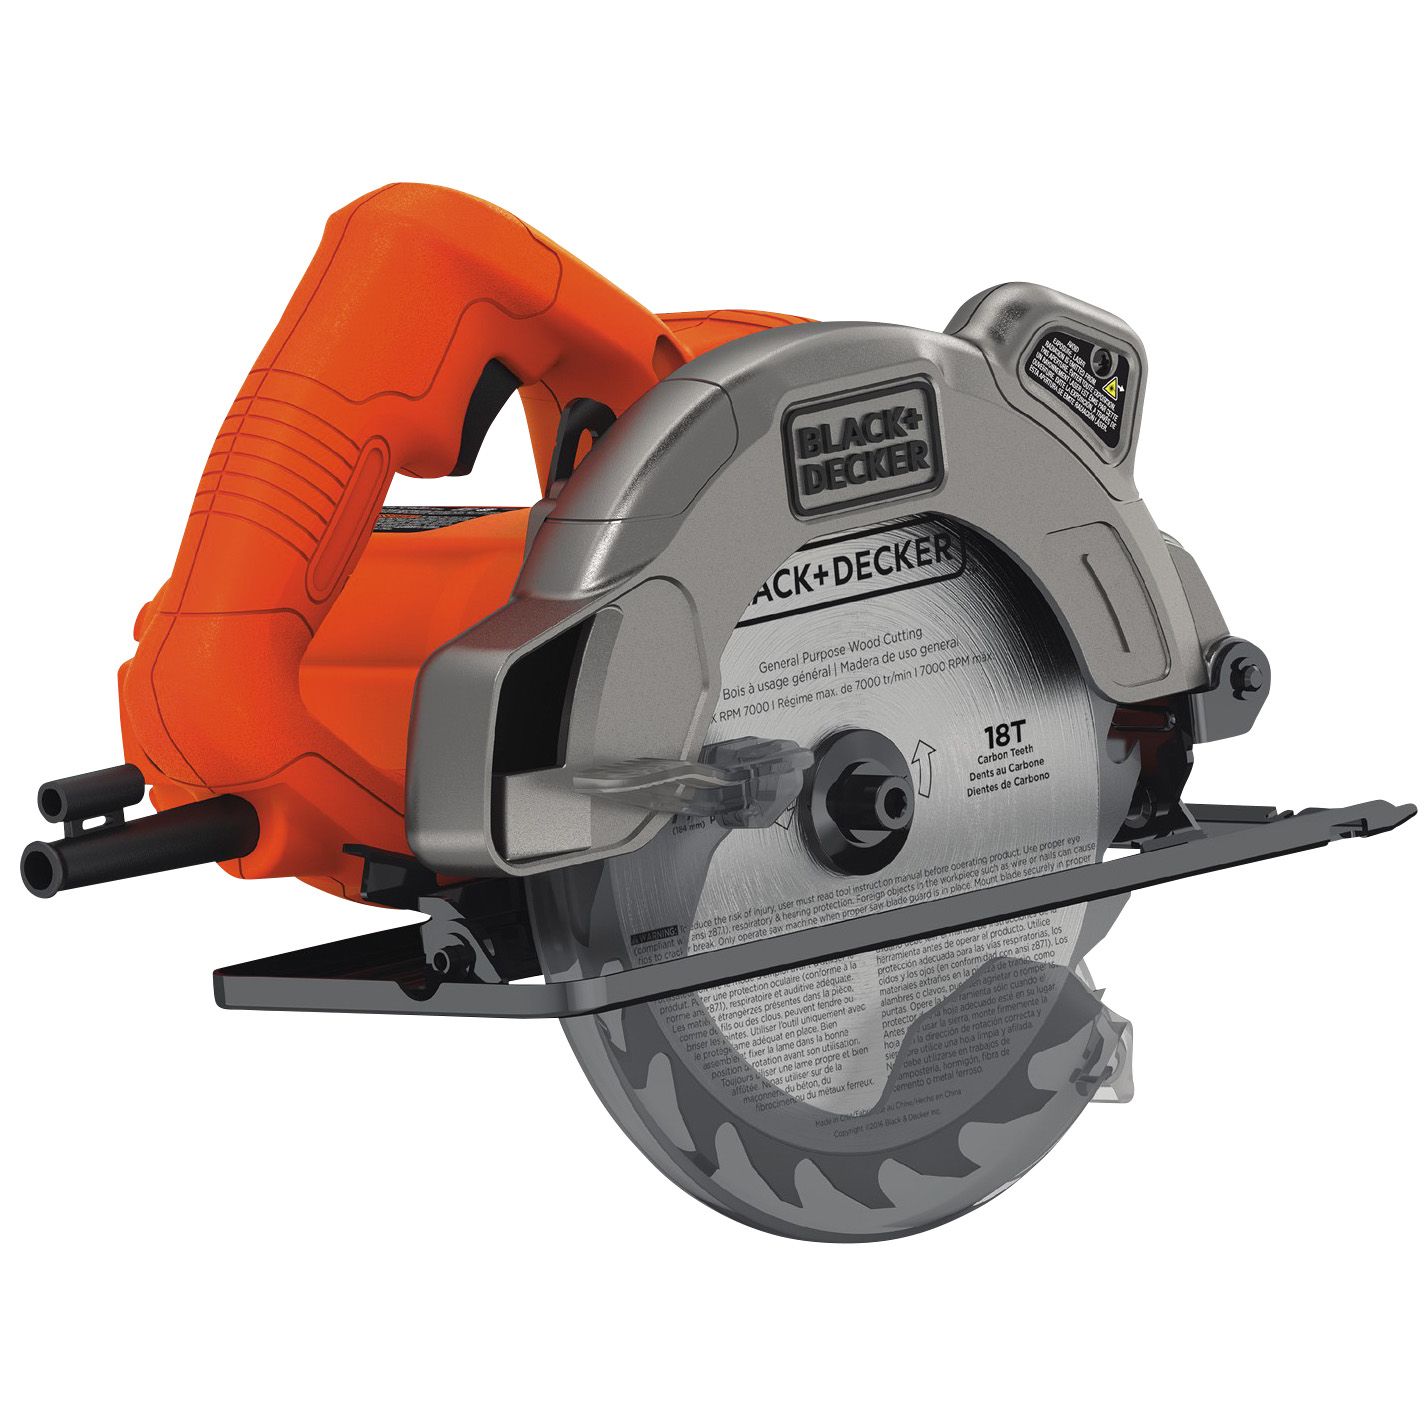 Fingerhut Electric Fireplaces Lovely Black Decker 13 Amp Corded 7 25" Circular Saw with Laser Guide Bdecs300c